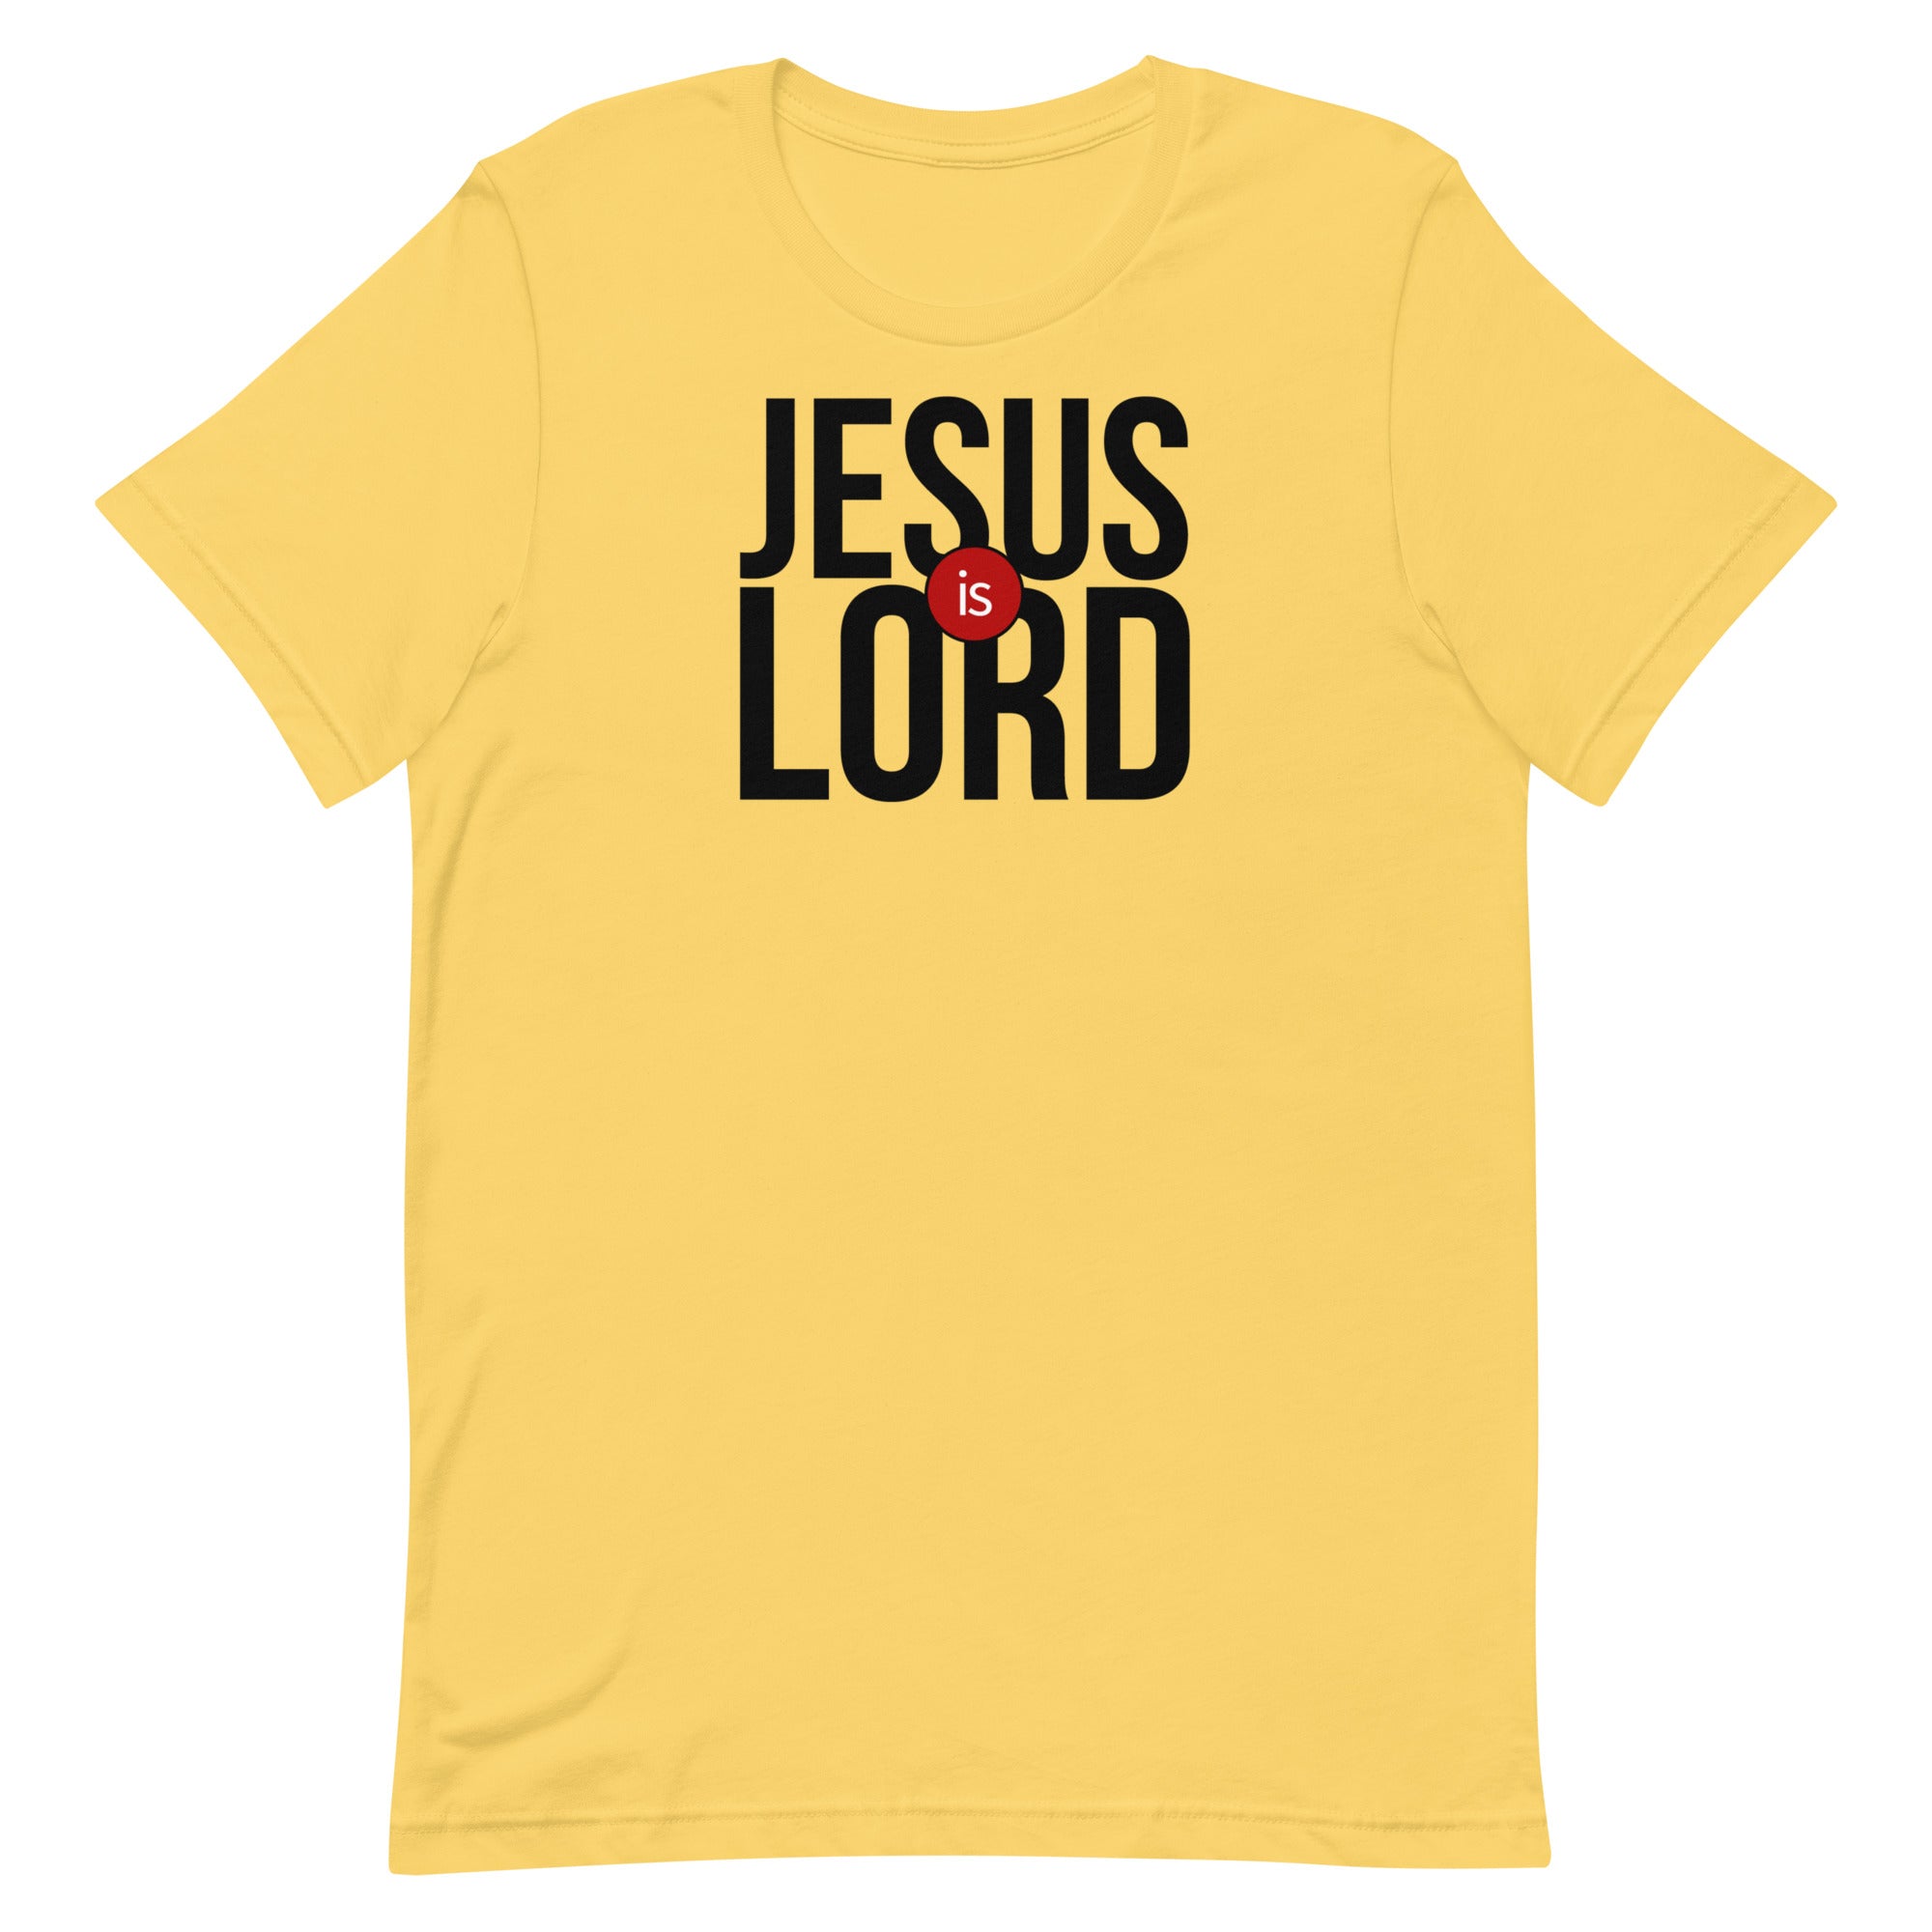 JESUS IS LORD MENS FRONT AND BACK T-SHIRT